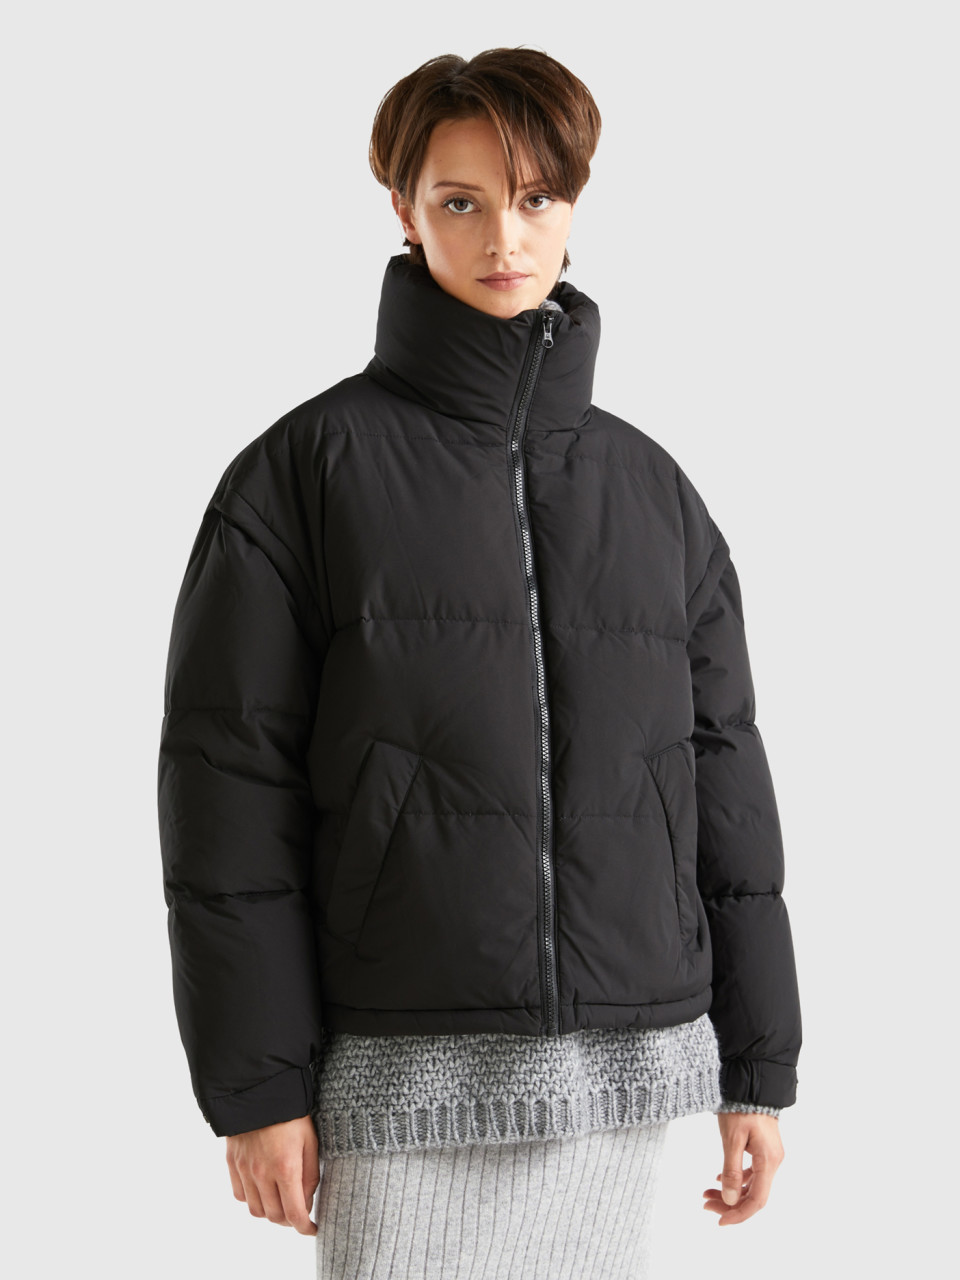 Benetton, Short Padded Jacket With Removable Sleeves, Black, Women